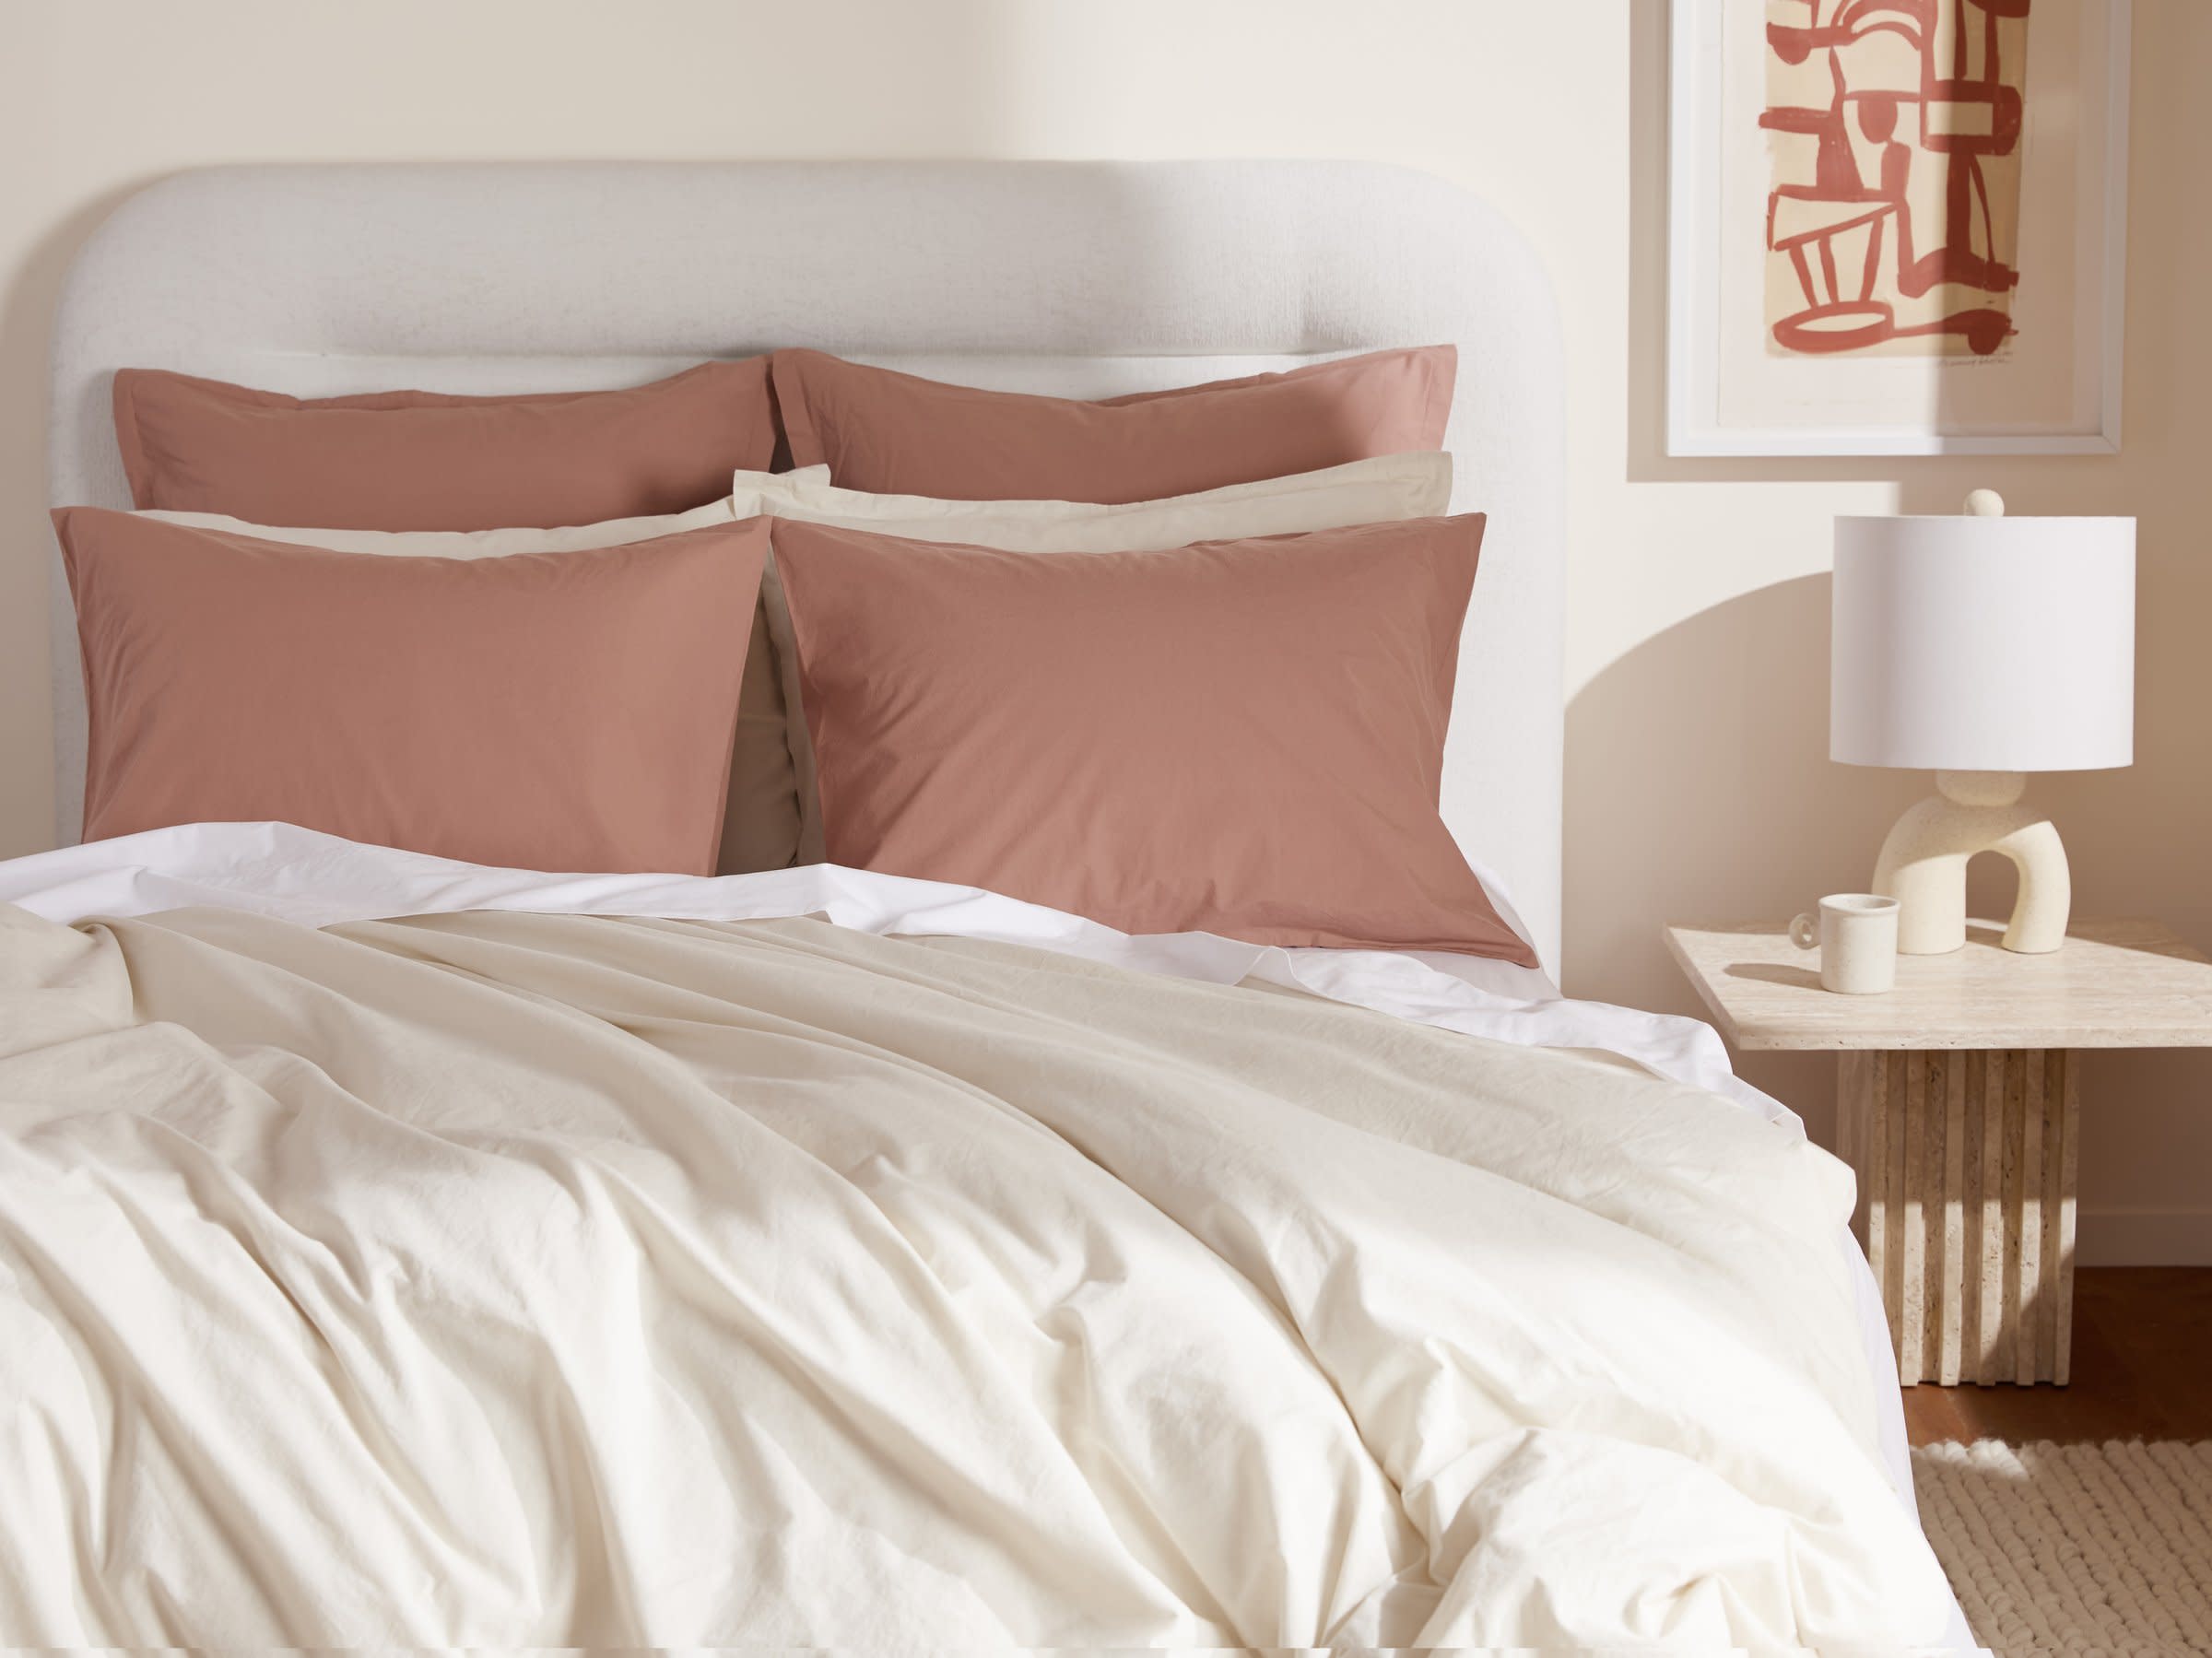 Clay Percale Pillowcase Set Shown In A Room